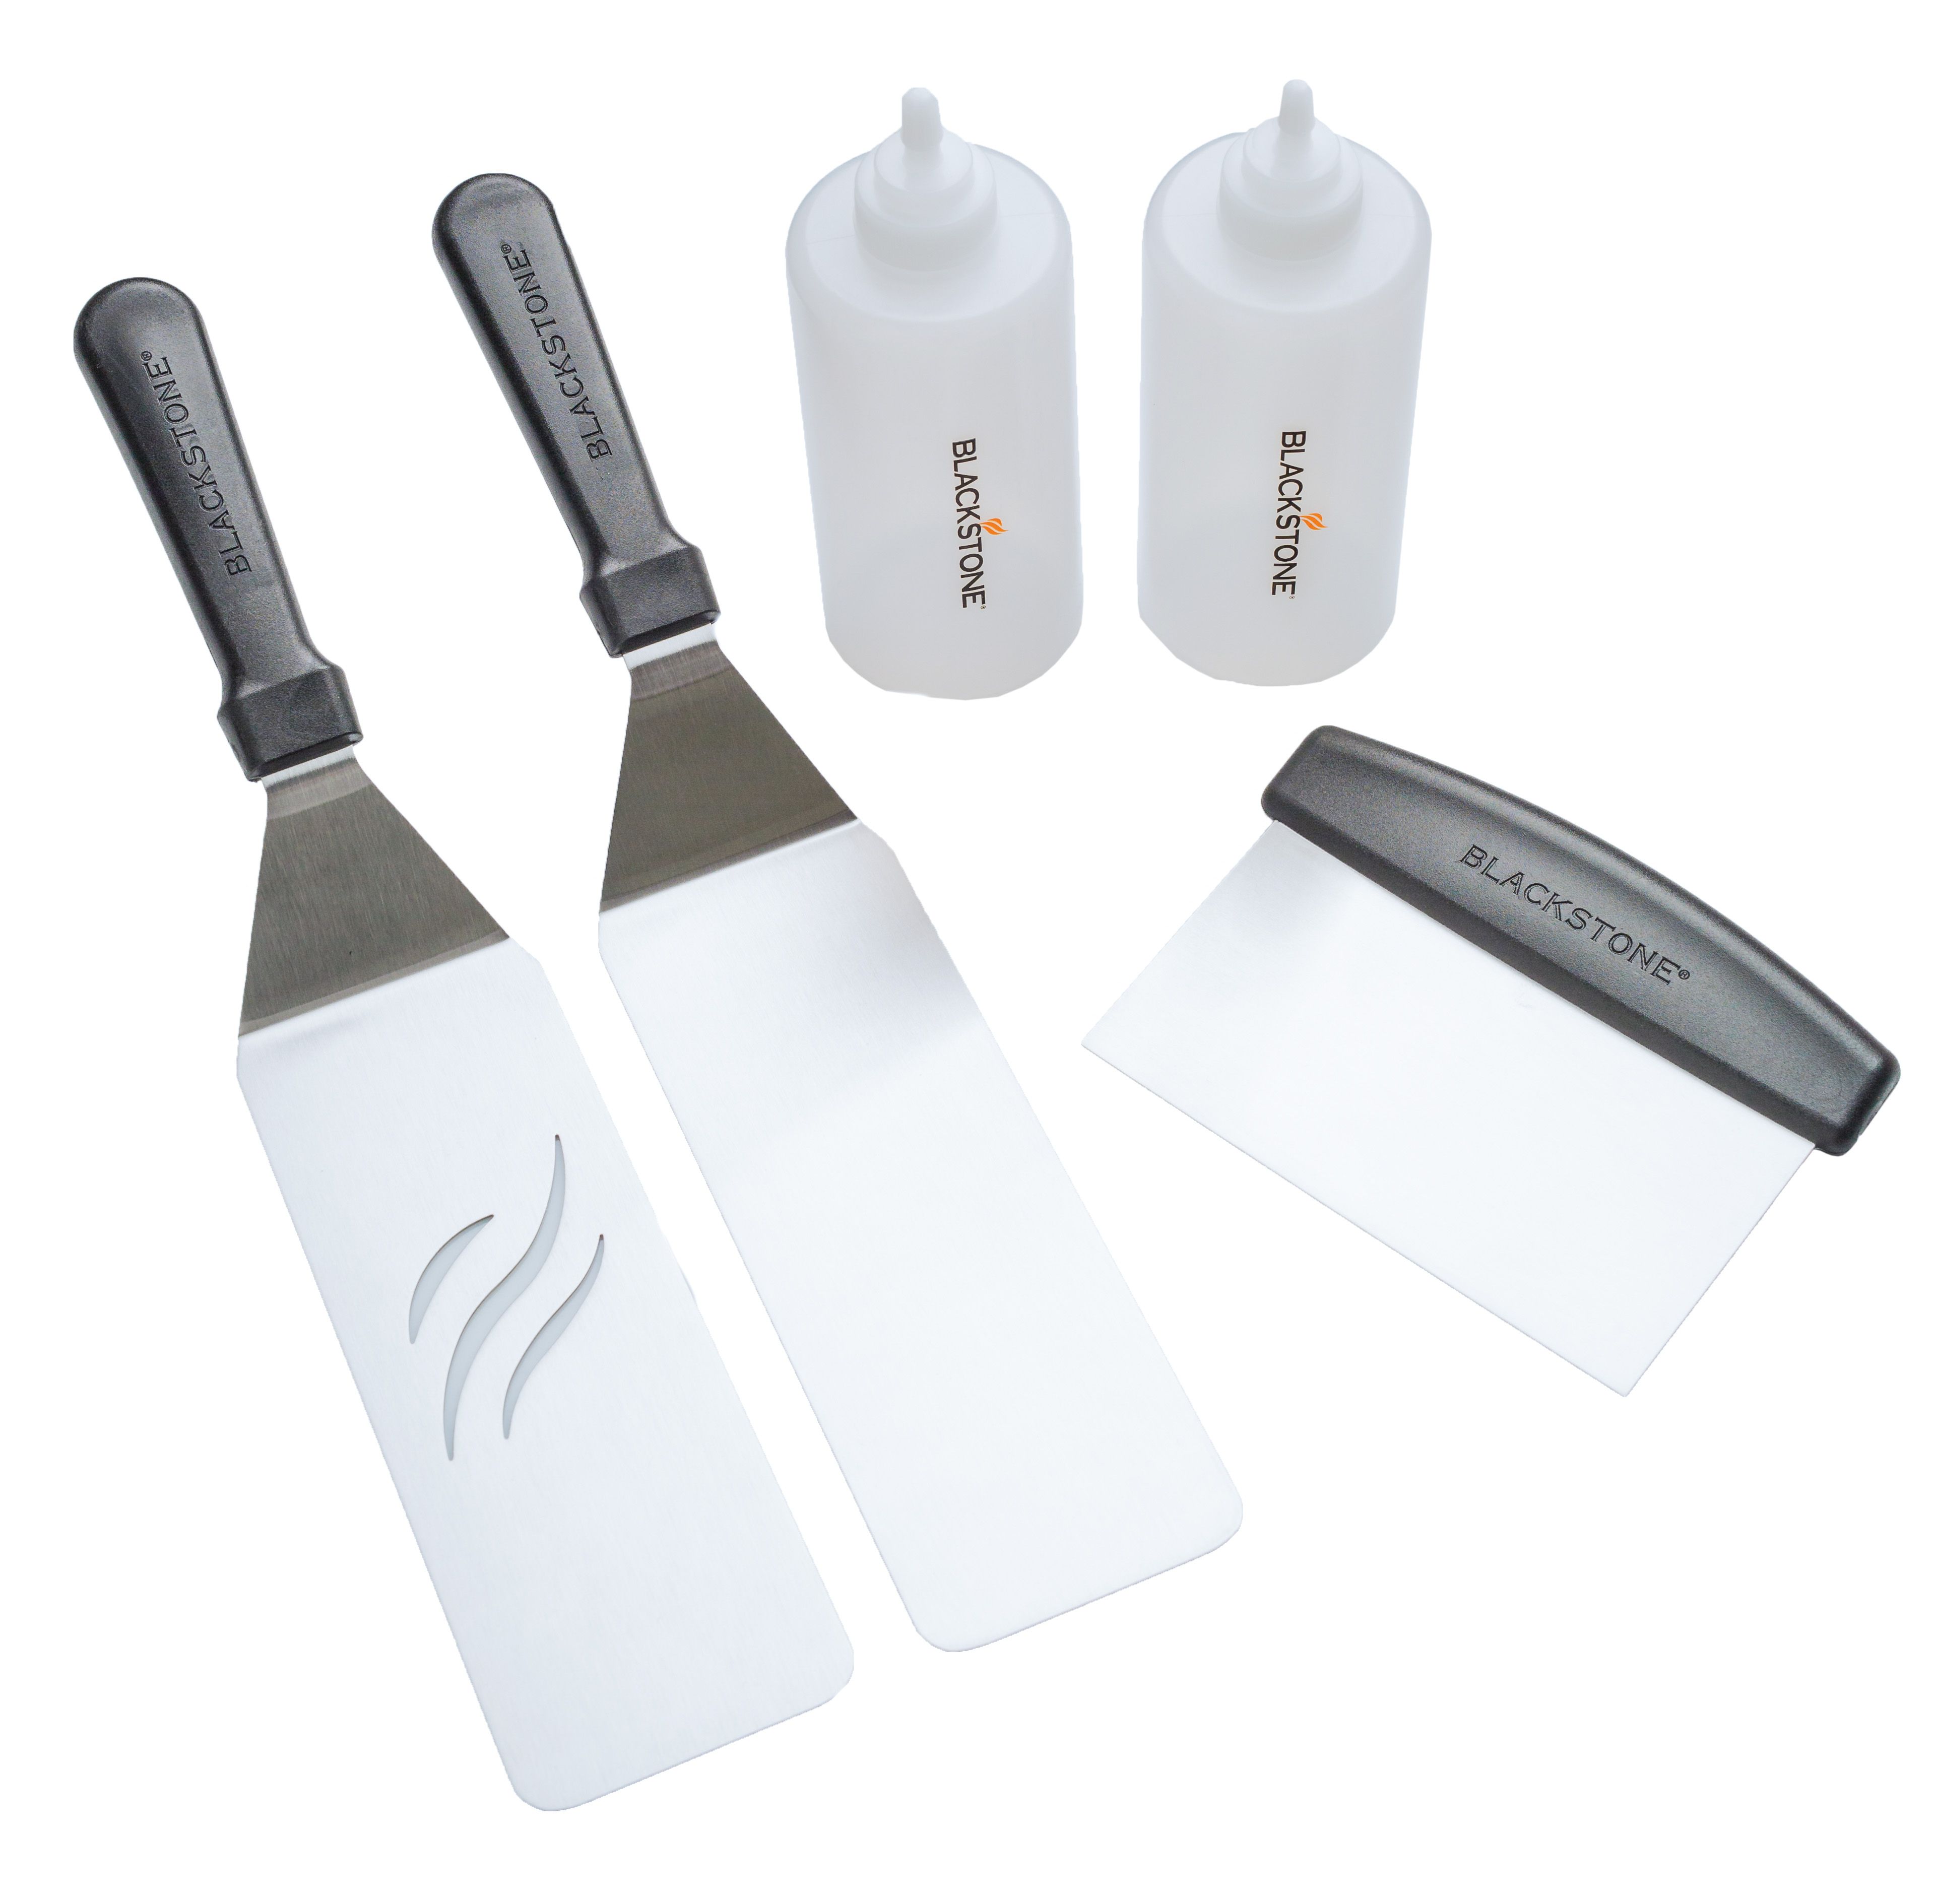 Blackstone-Commercial-Grade-5-Piece-Griddle-Cooking-Tools-Kit-1712035